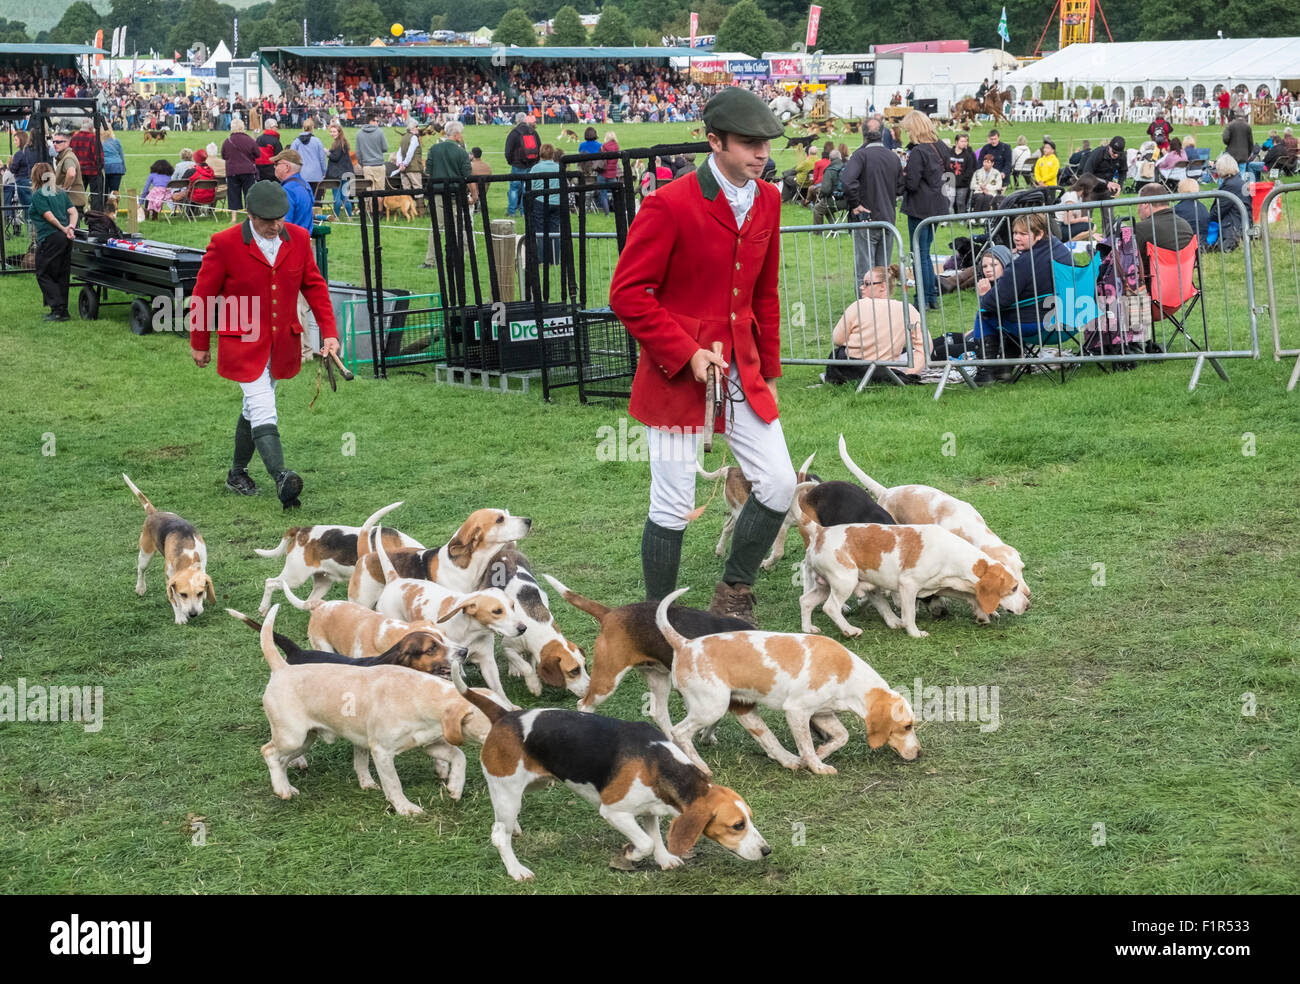 Hunting Dogs Beagles Participating At A Country Fair Event